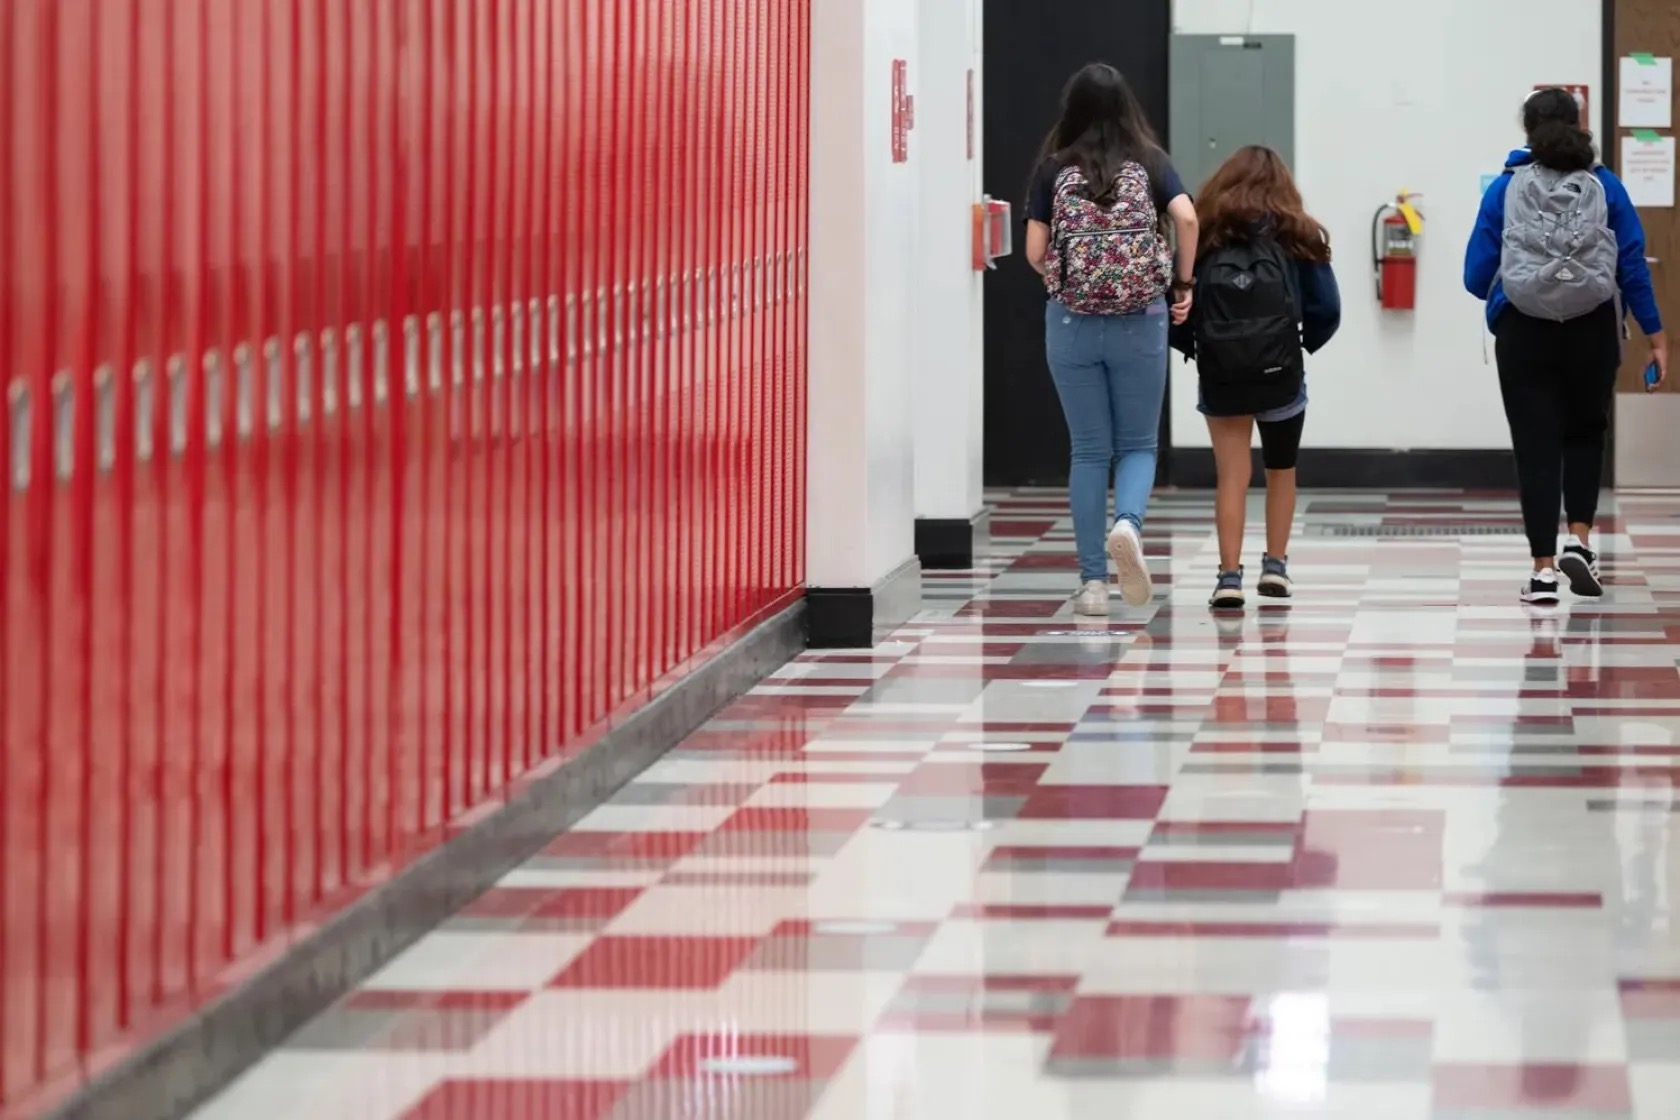 Students walk the hallway at Lake View High School in Chicago